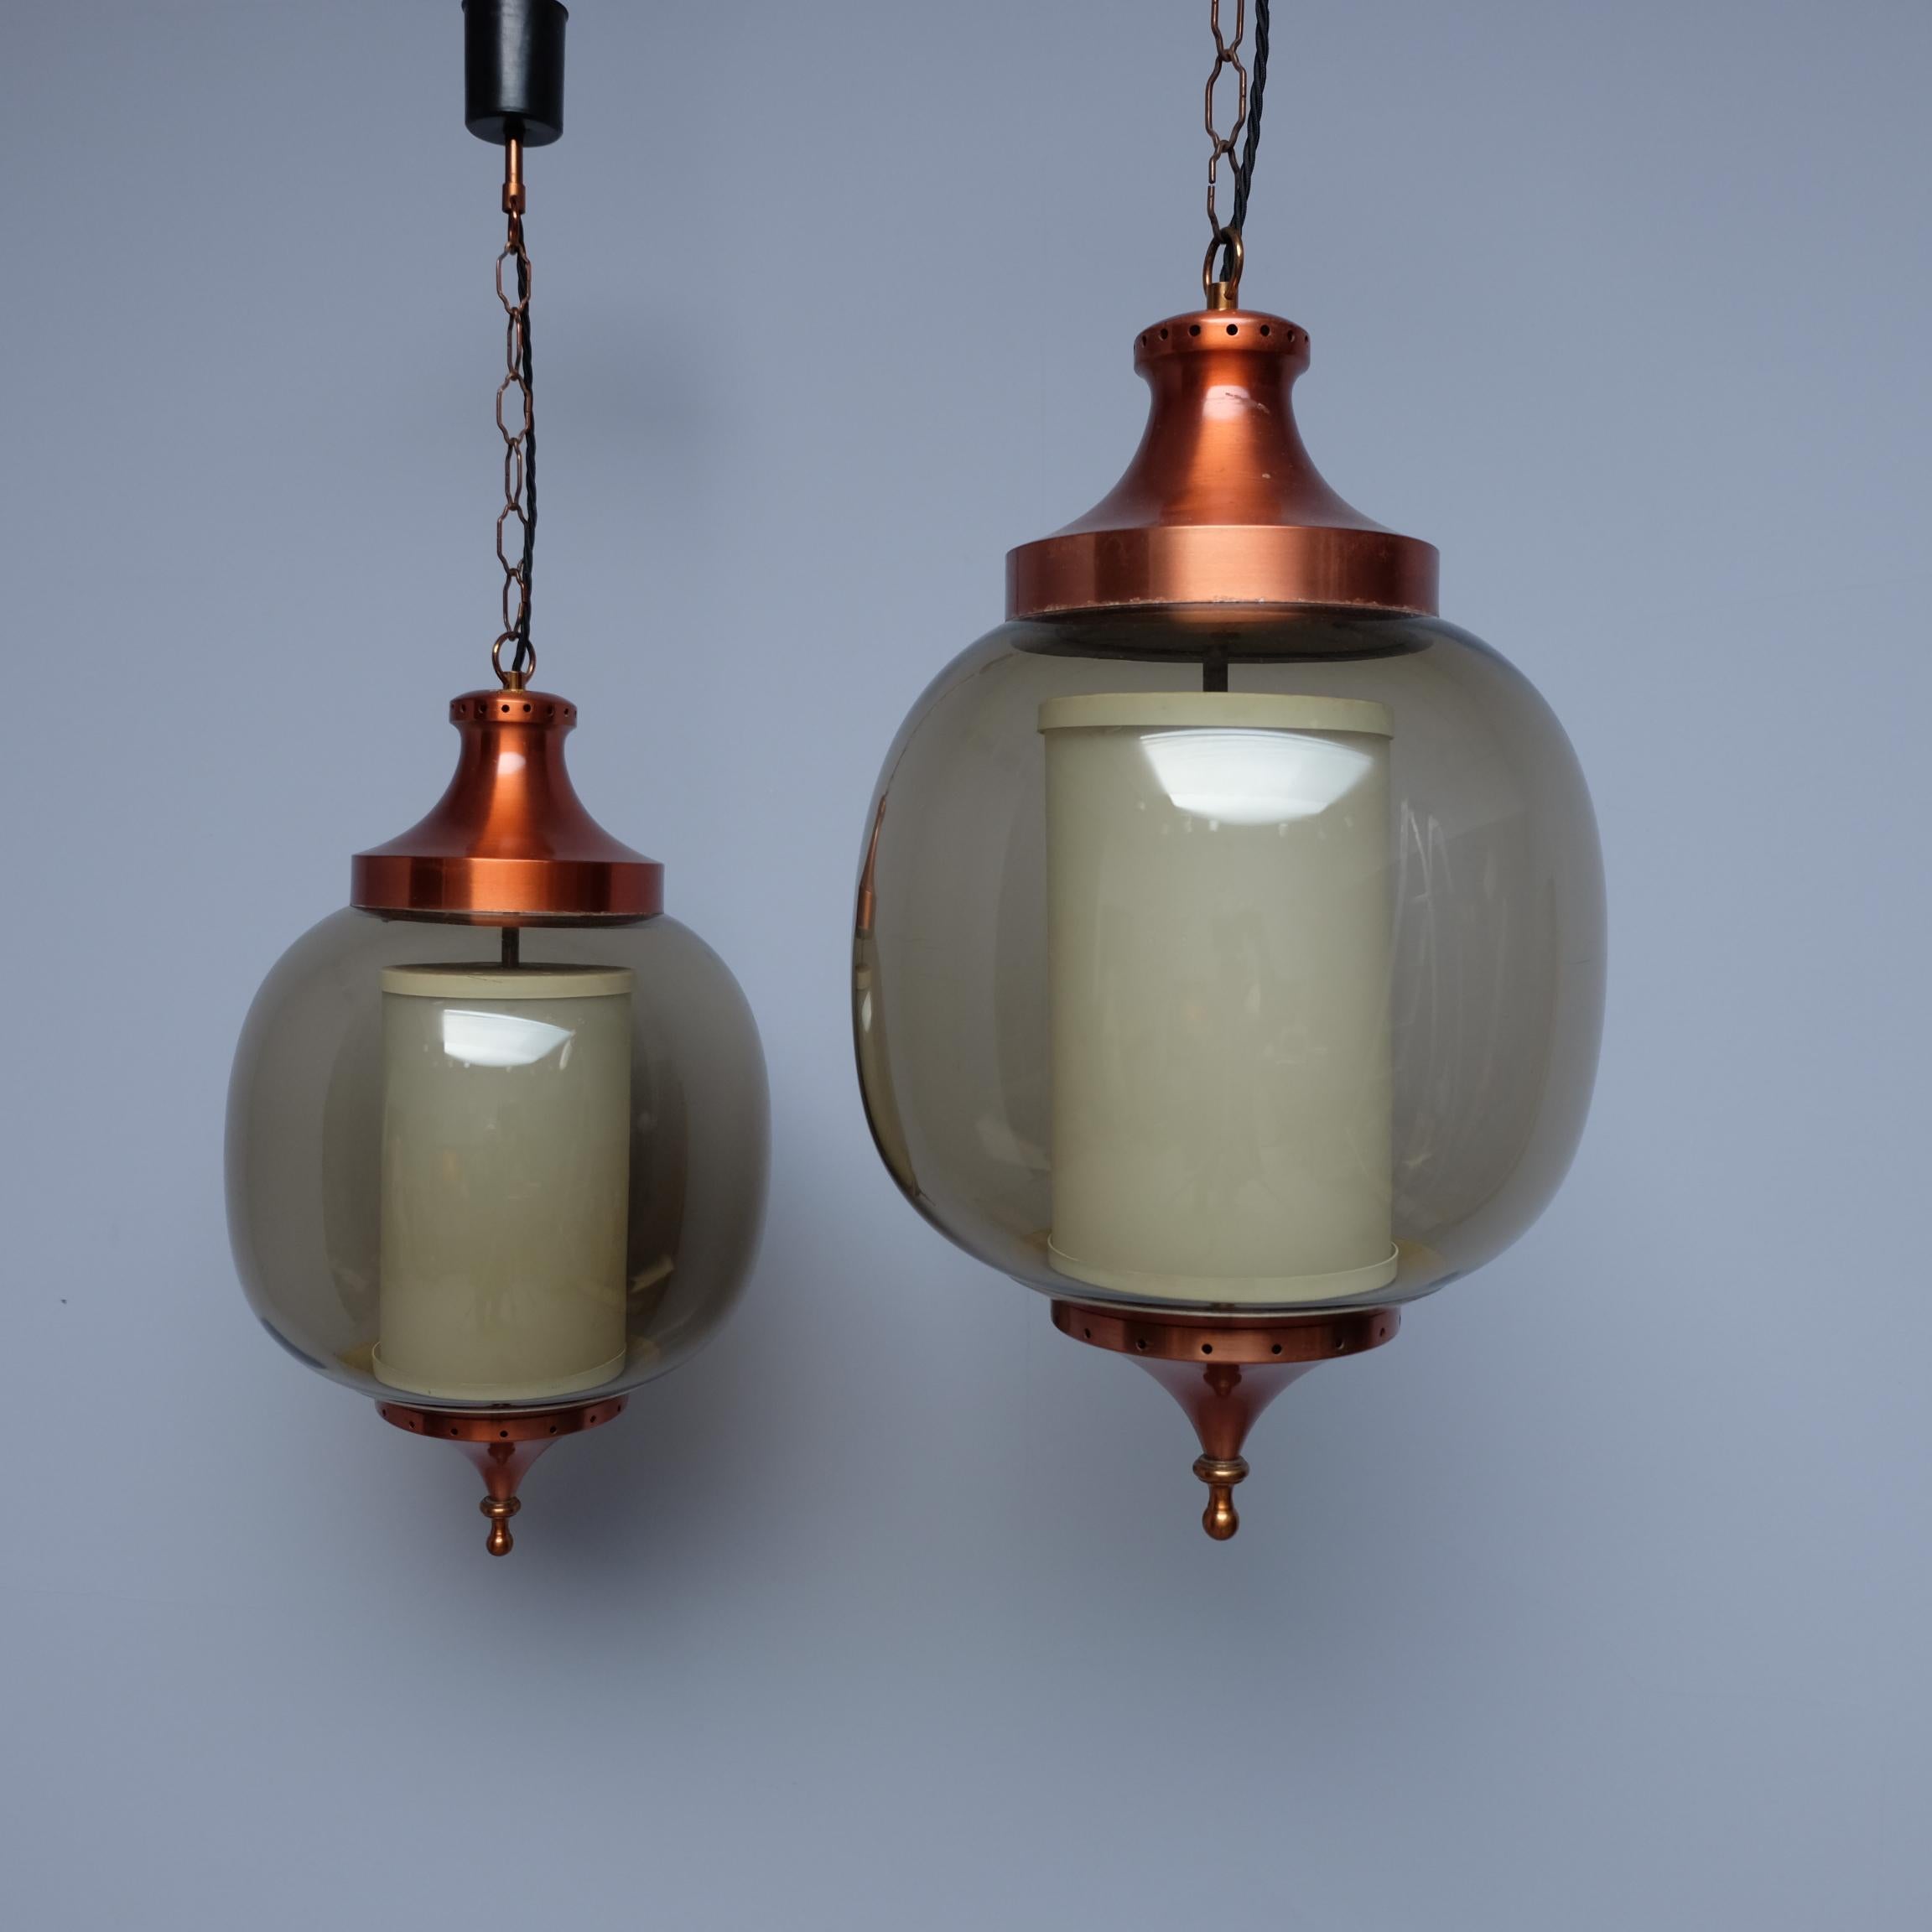 A stunning pair of 1960s French 'Lumiere' pendant lights formed in the shape of lanterns. Made from anodised, copper-coloured, aluminium, with smoked glass bulbous shades. The white tubular glass inner shades shed a warm glowing light giving the